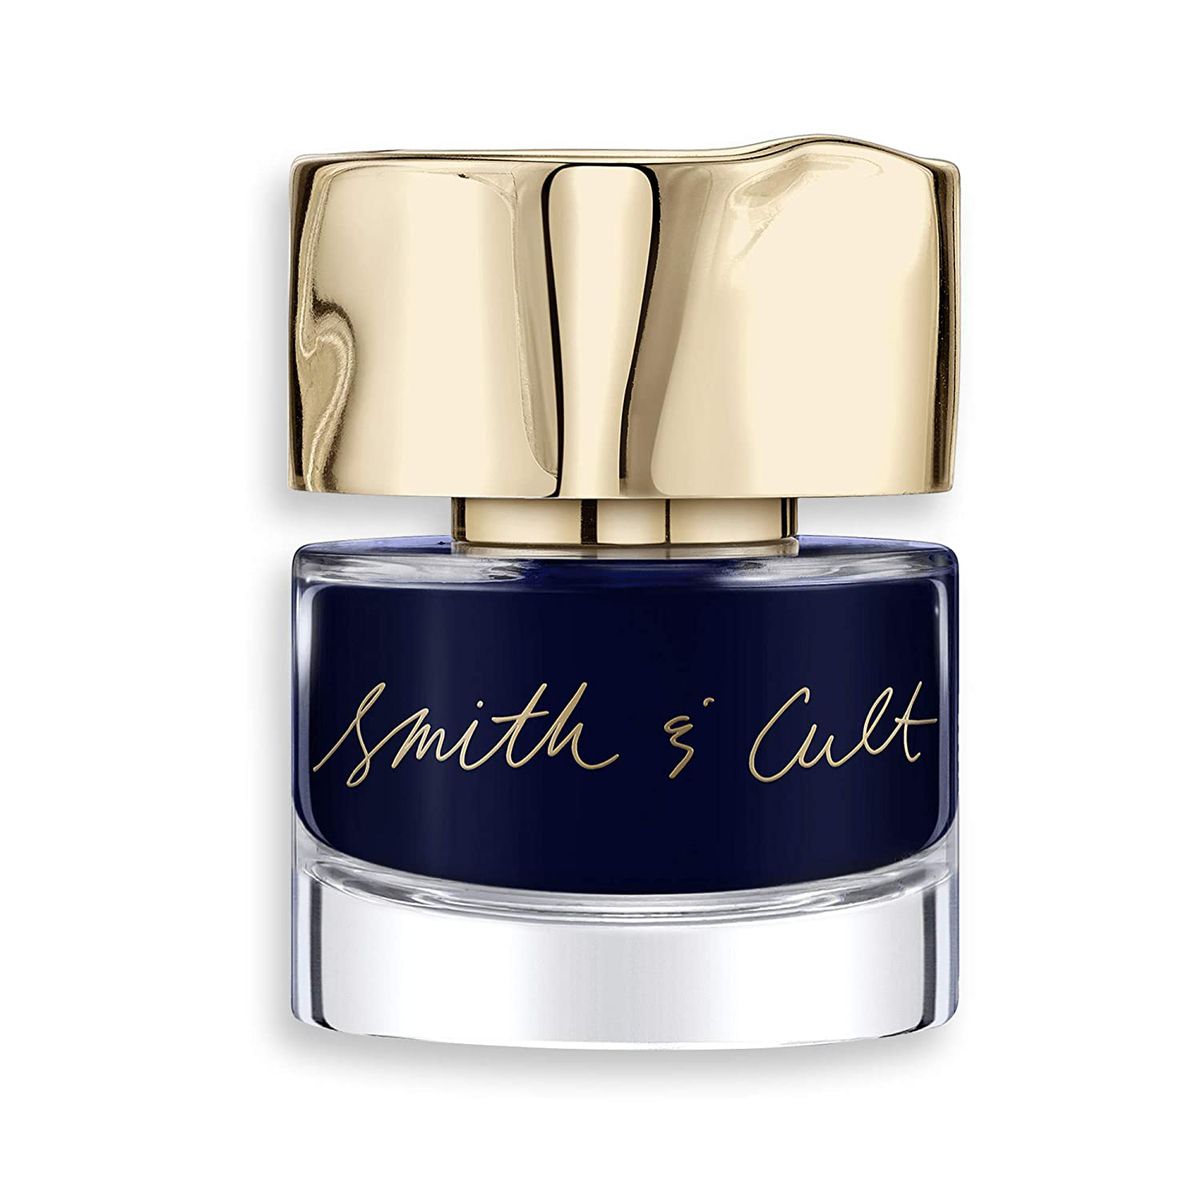 Smith & Cult ‘Kings & Thieves’